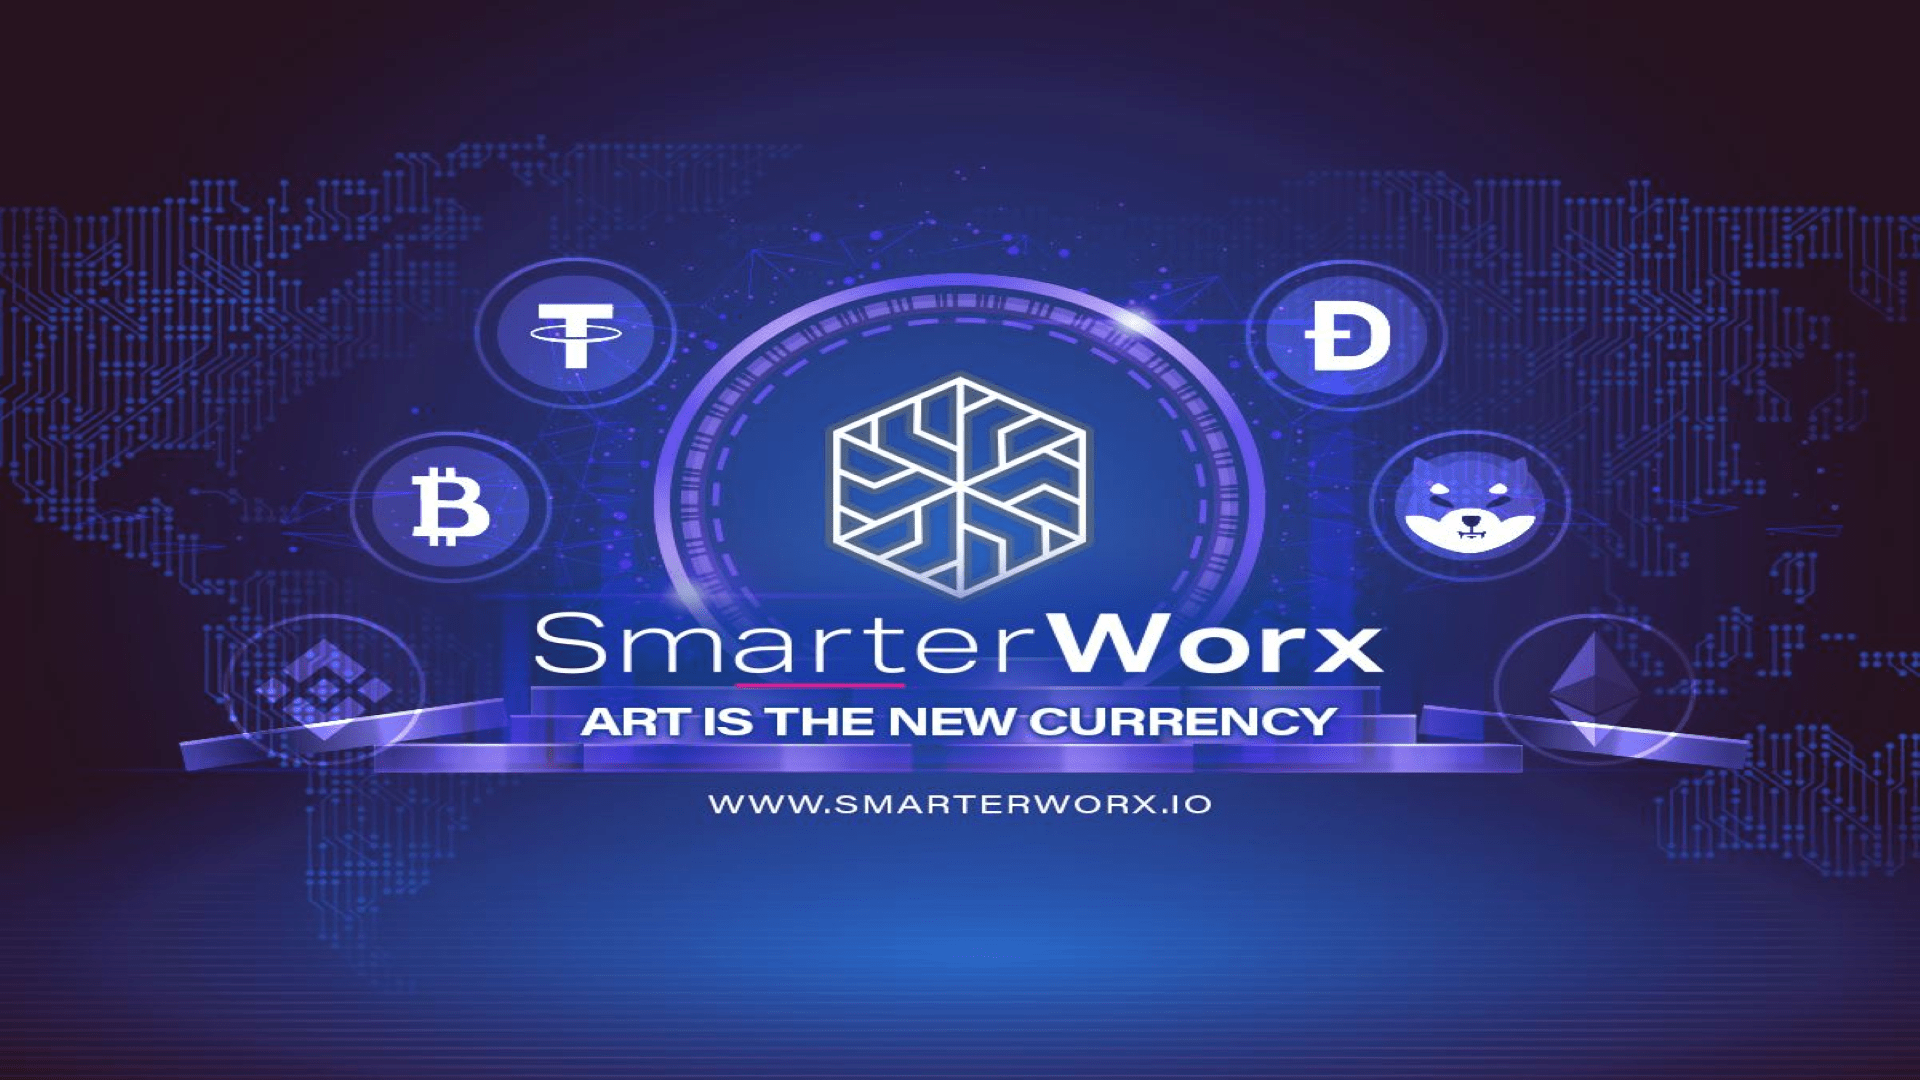 SmarterWorx Rated as Unicorn by Crypto Analysts, Similar to Maker and Ripple Once Were